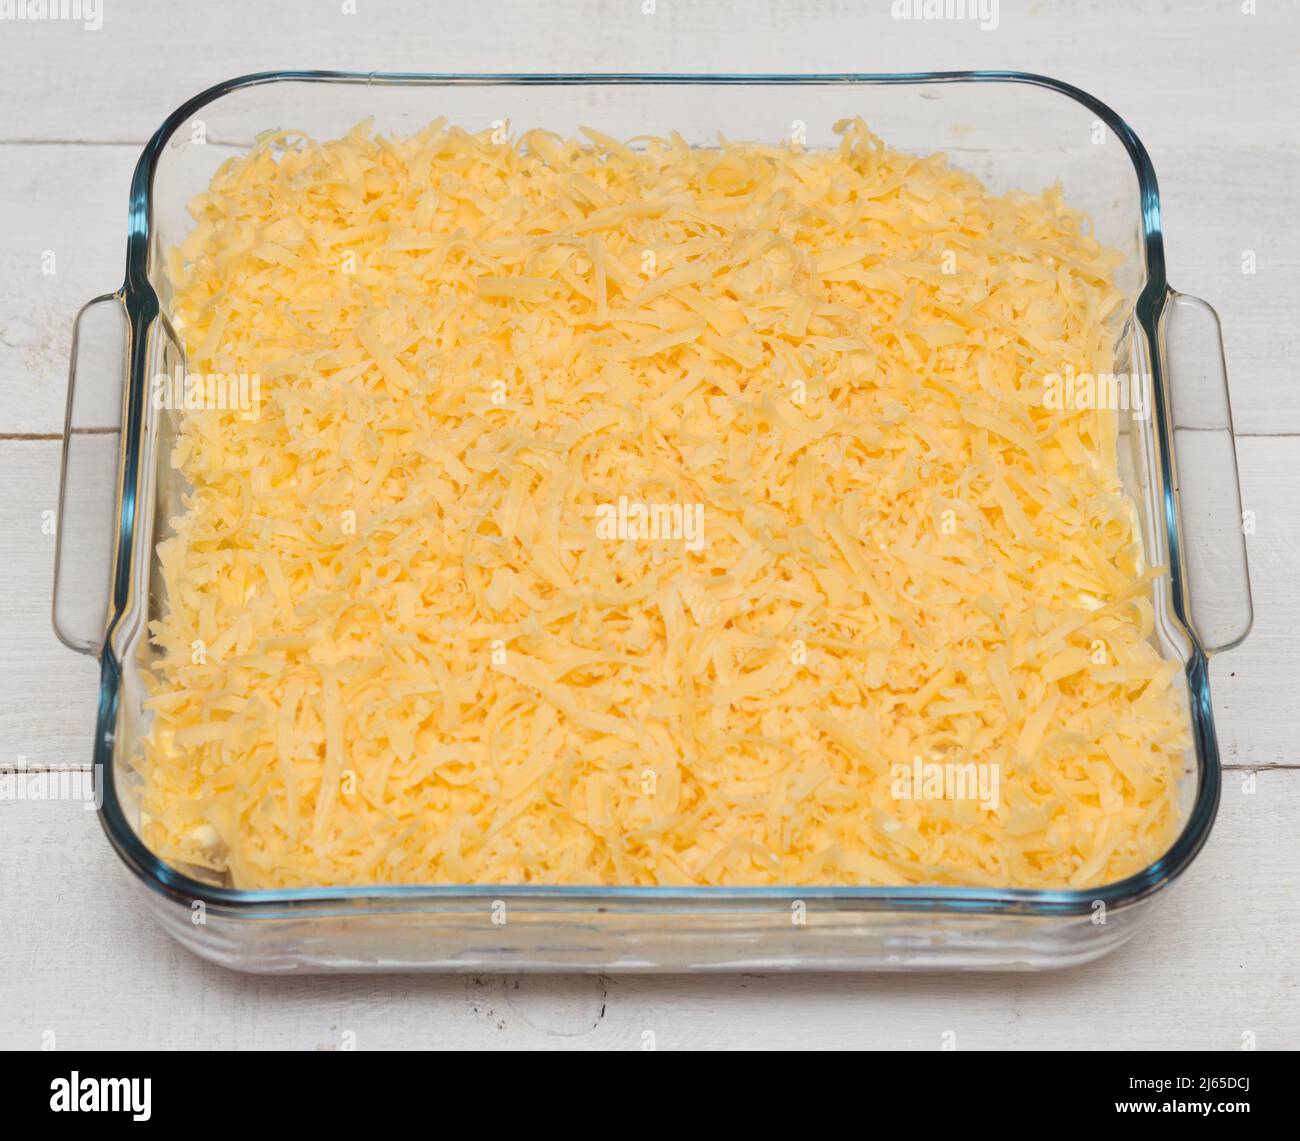 Top view of uncooked lasagna in transparent tray on a wooden table Stock Photo